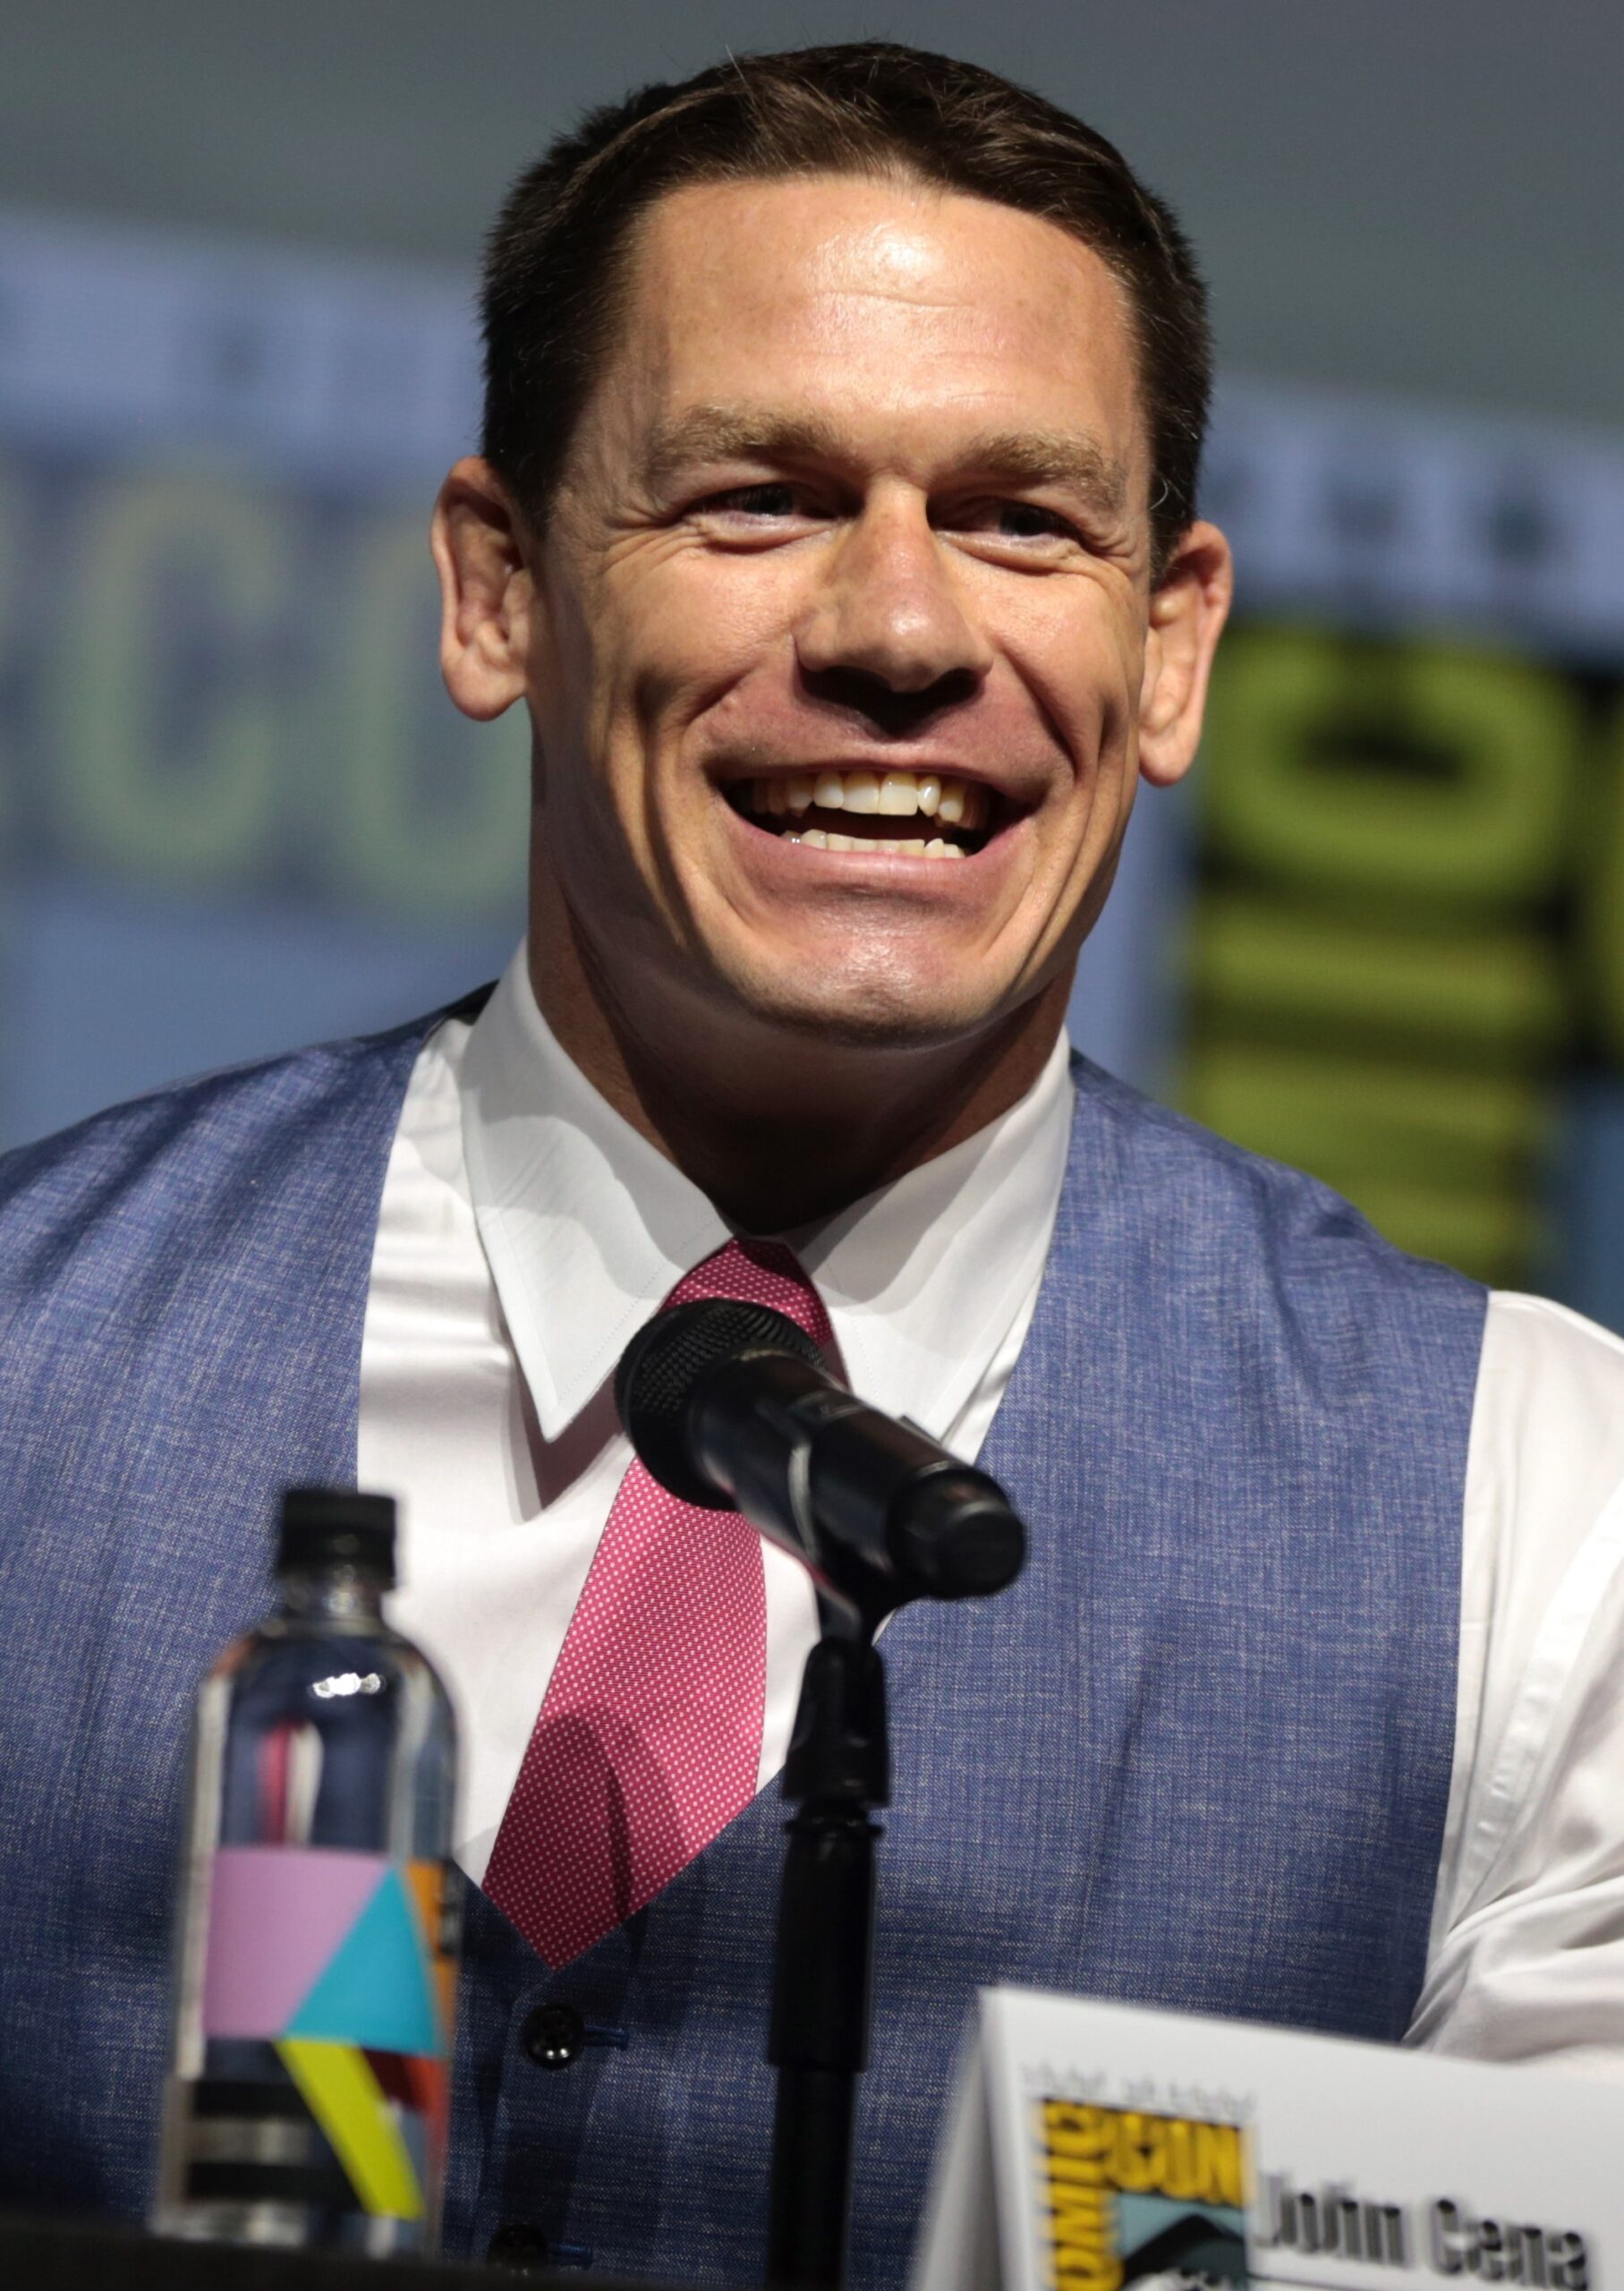 John Cena is an American wrestler, actor, and rapper with a net worth of $80 million .John Cena journey to wealth has been paved by his remarkable achievements in wrestling, lucrative endorsements, and successful movie roles. Let’s delve into the fascinating story of John Cena: